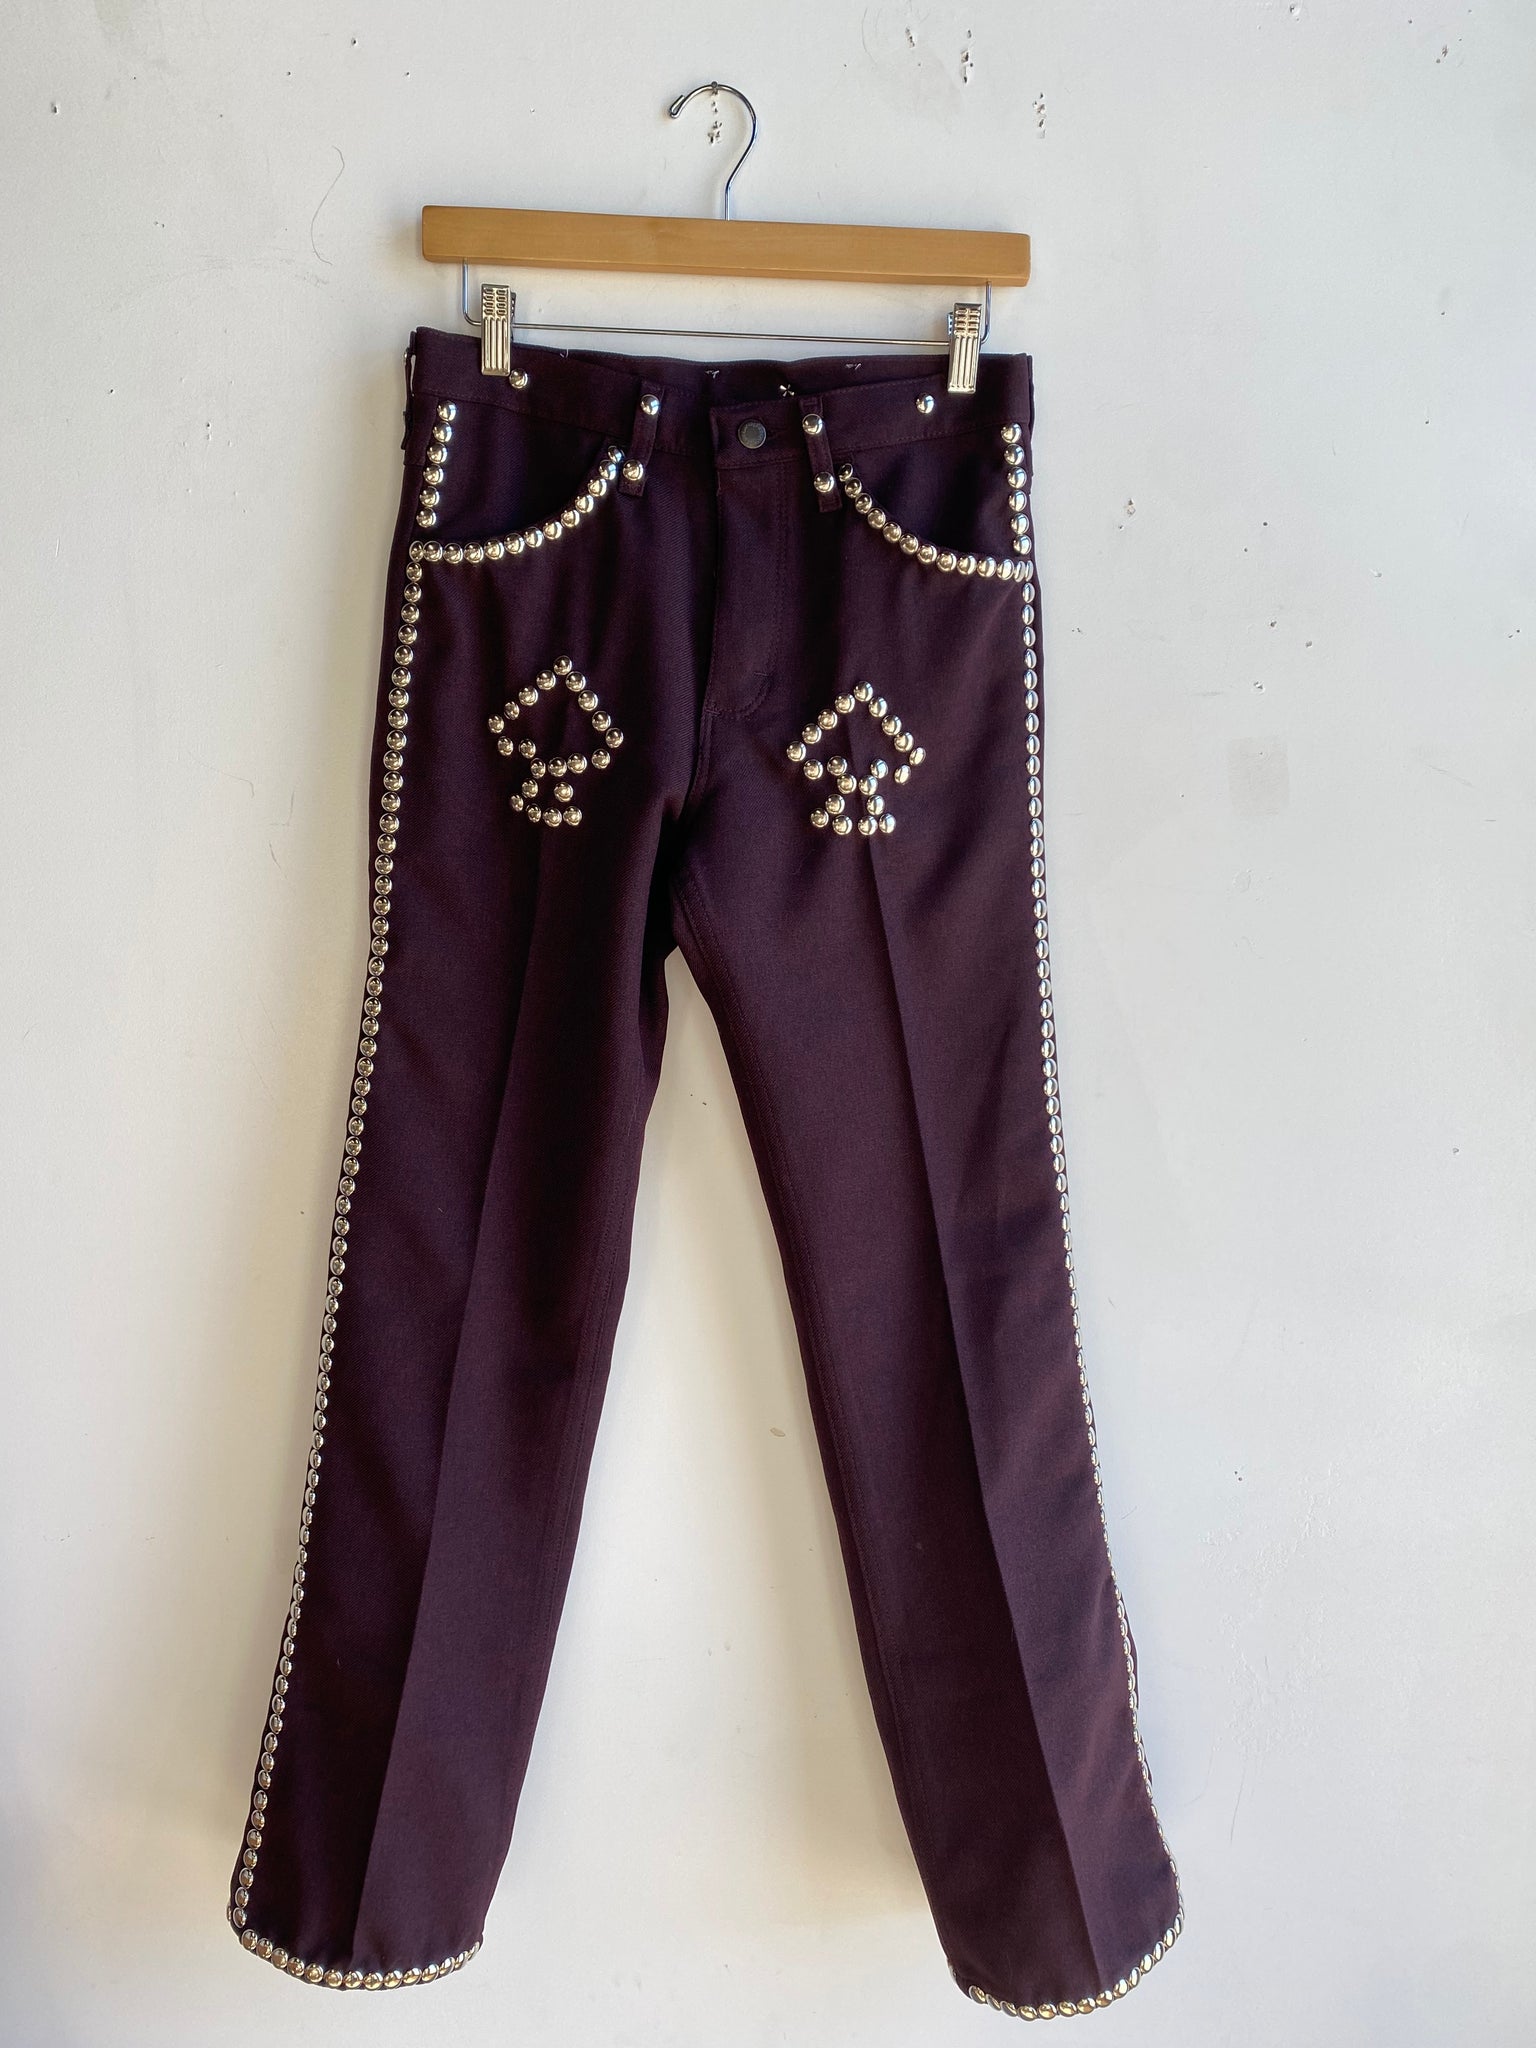 The Ace of Spades Studded Pants